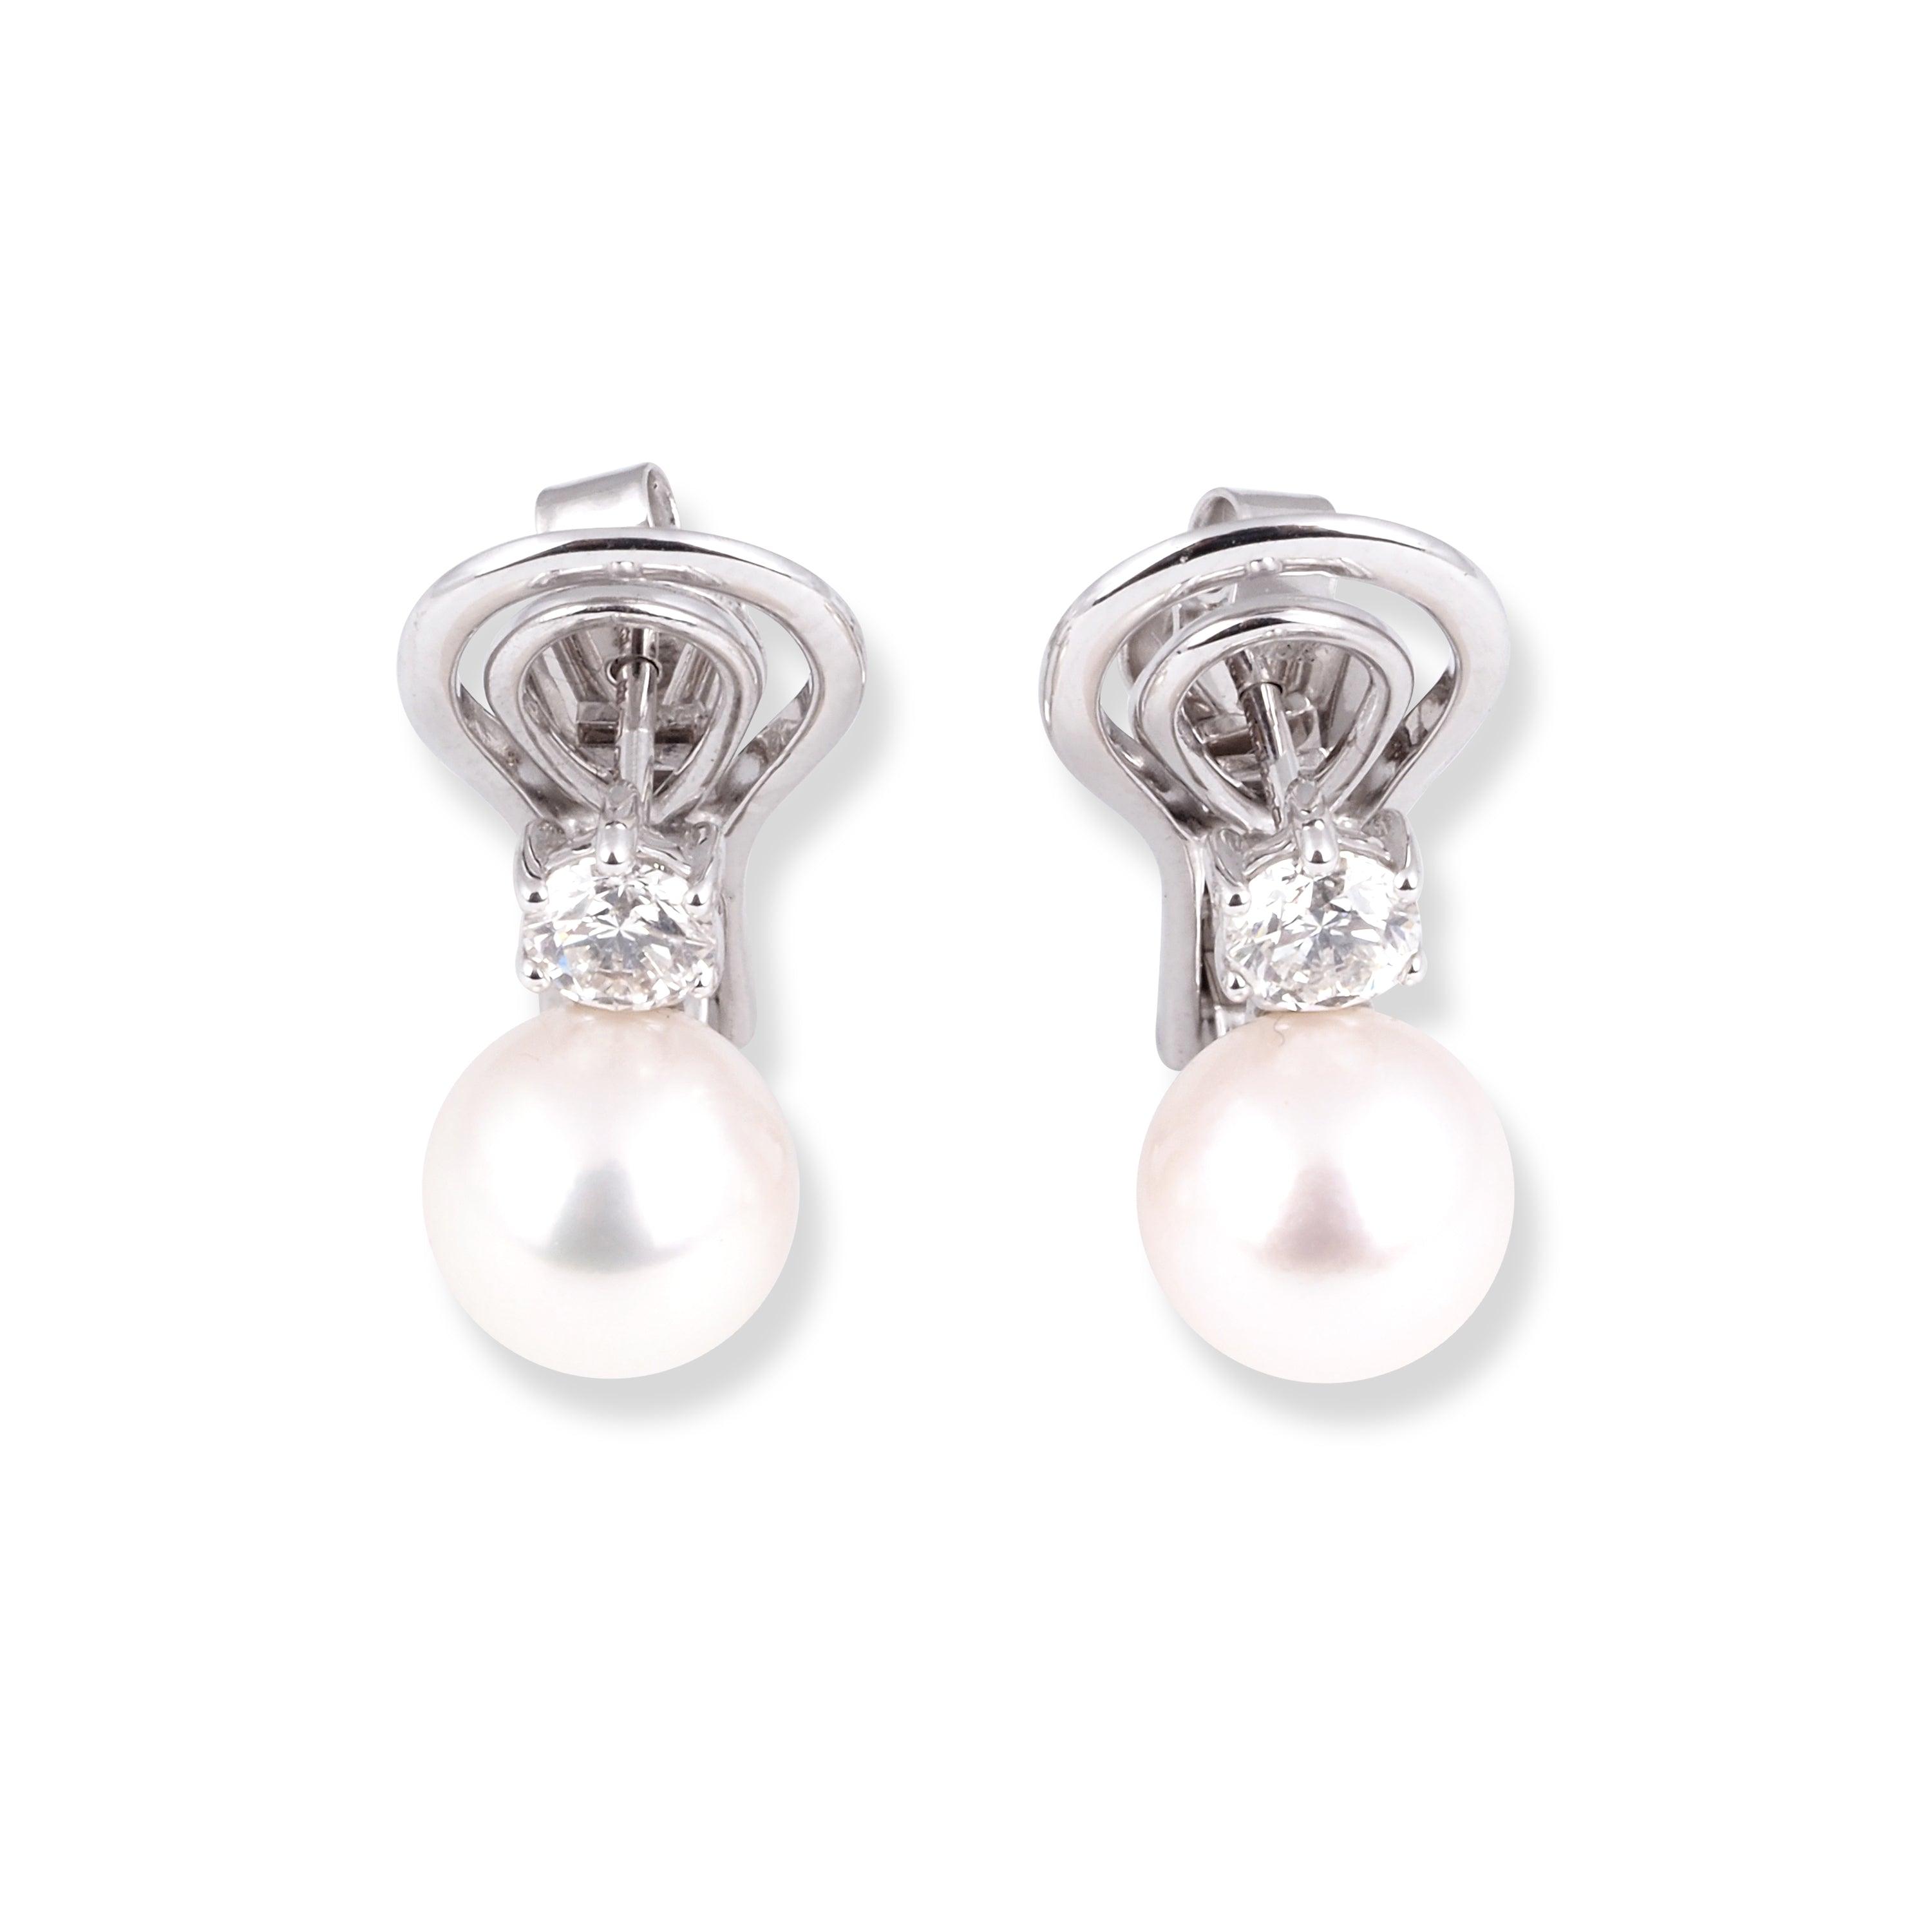 18ct White Gold Diamond and Cultured Pearl Earrings EC53549-2-W - Minar Jewellers